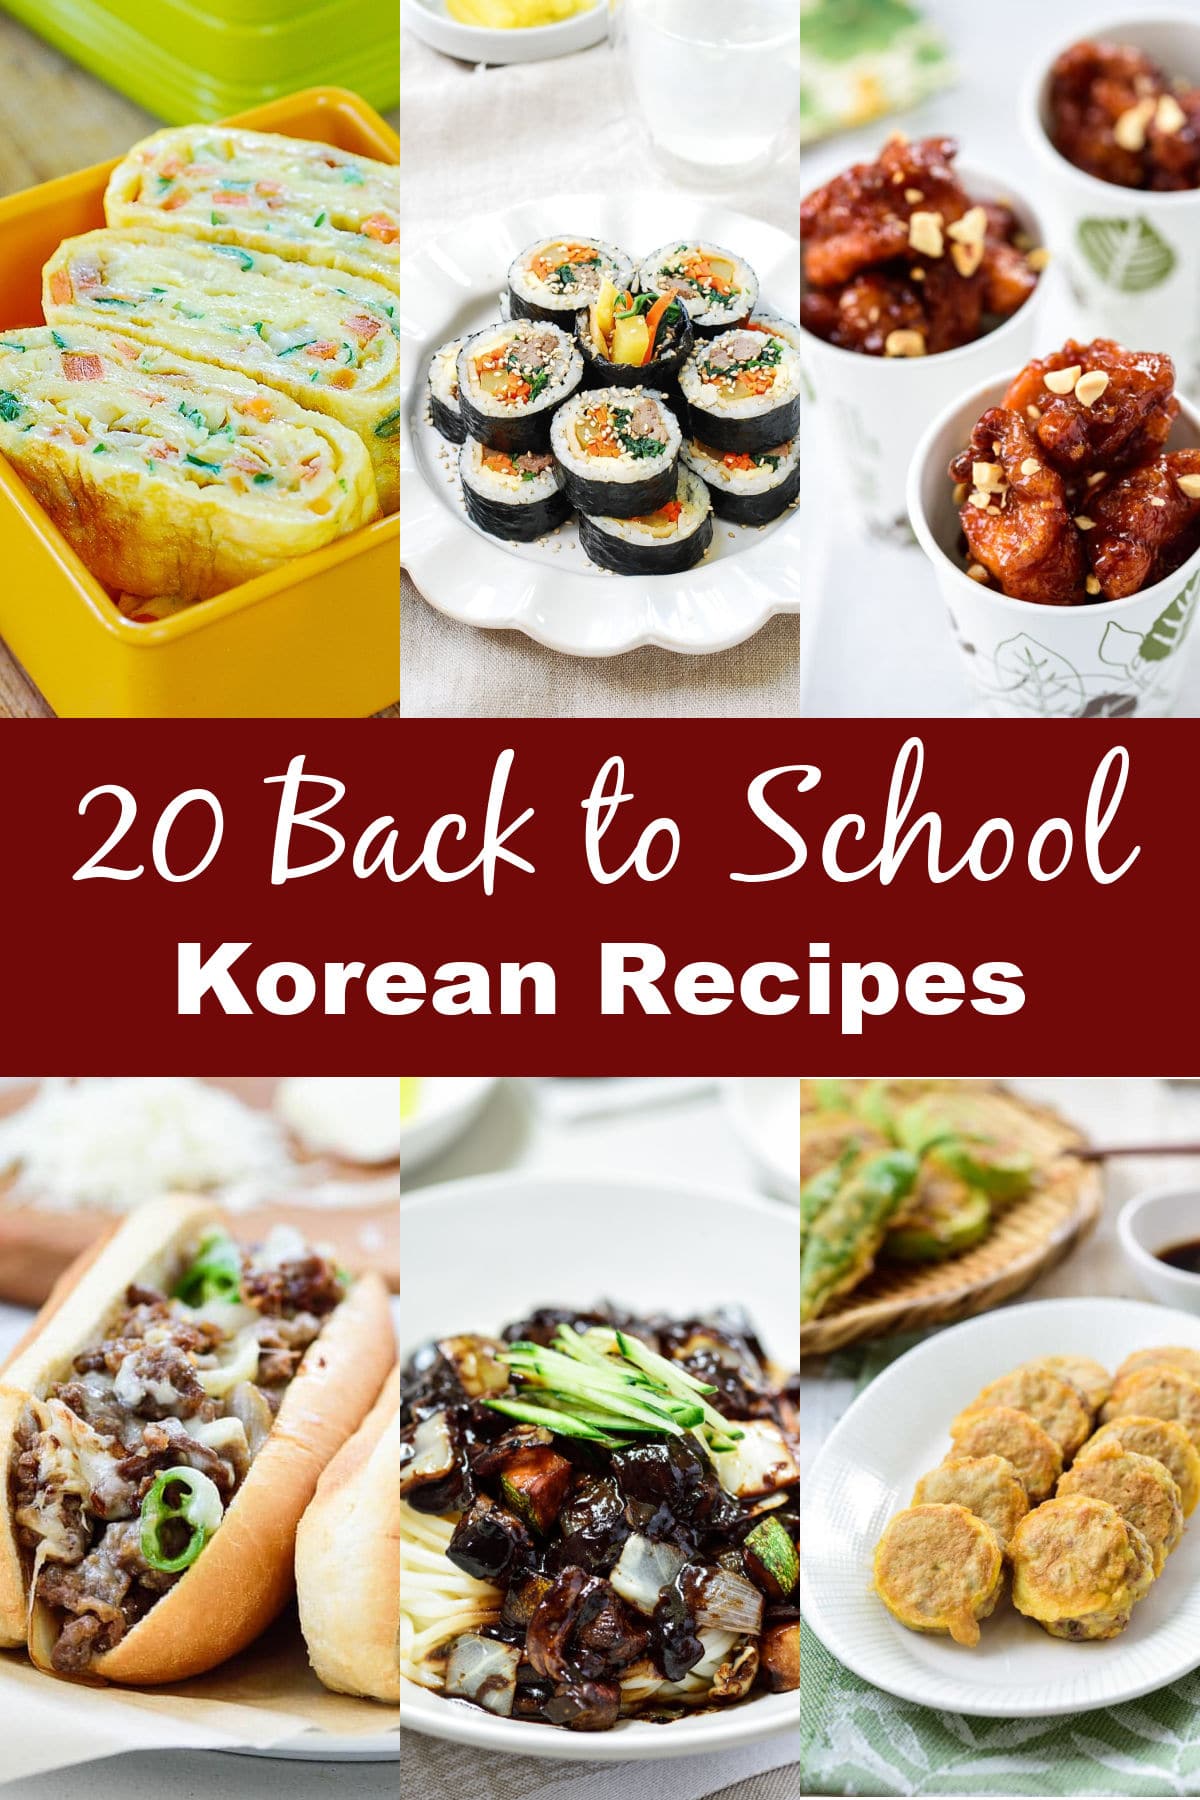 4 x 6 in 9 - 20 Korean Recipes for Back to School